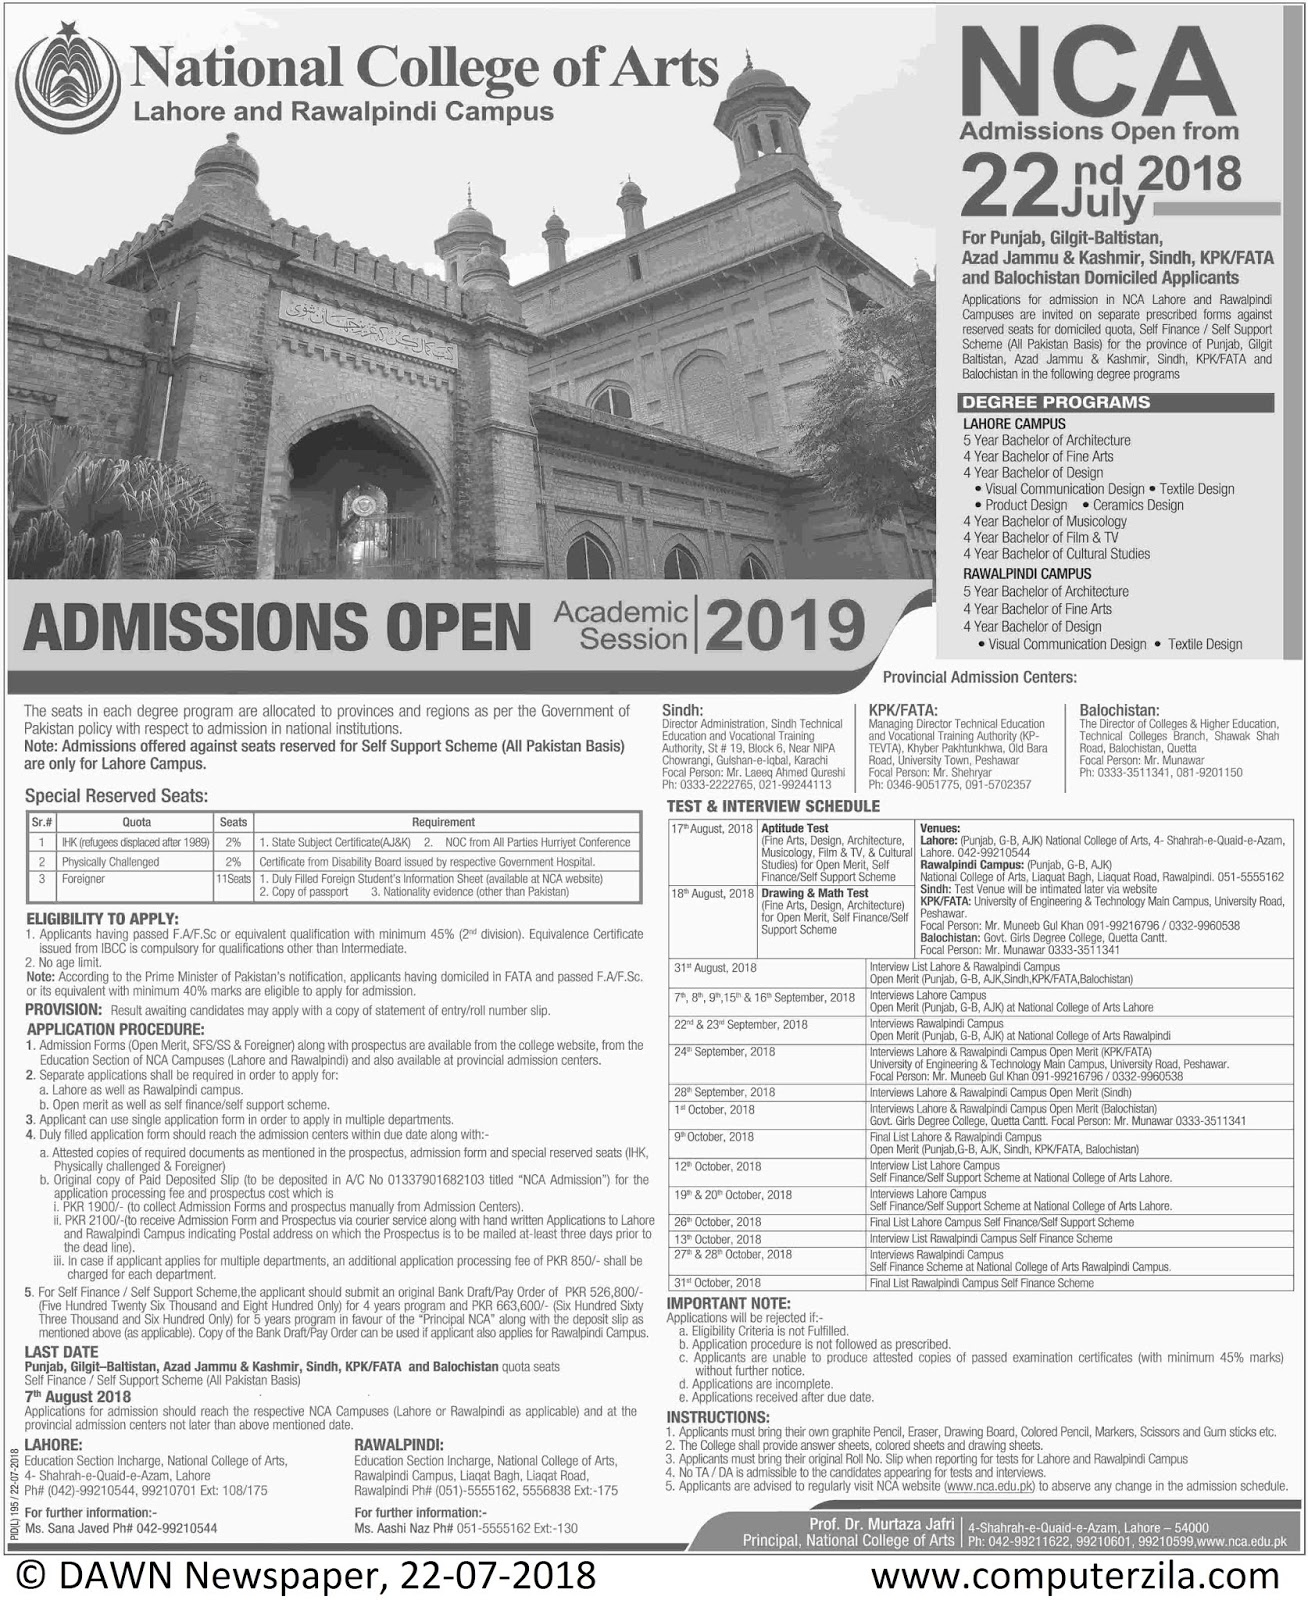 Admissions Open For Spring 2019 At NCA Lahore and Rawalpindi Campus